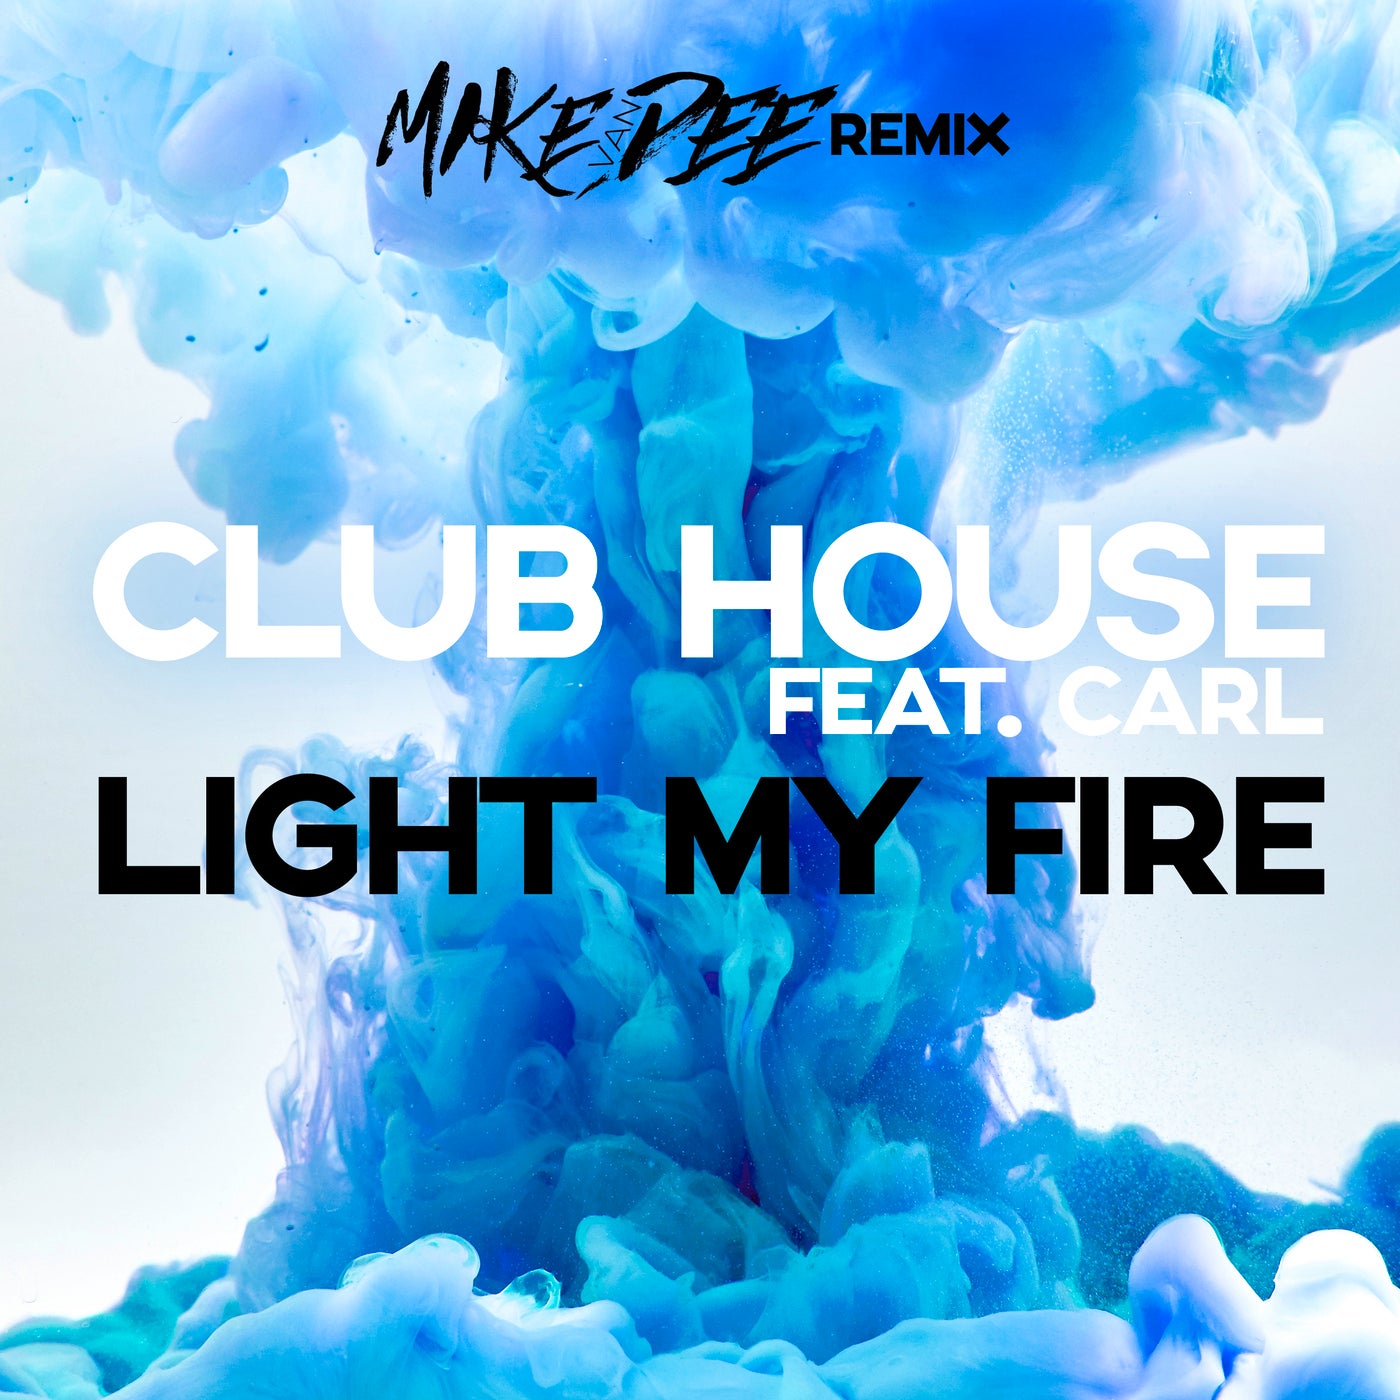 Club House music download - Beatport